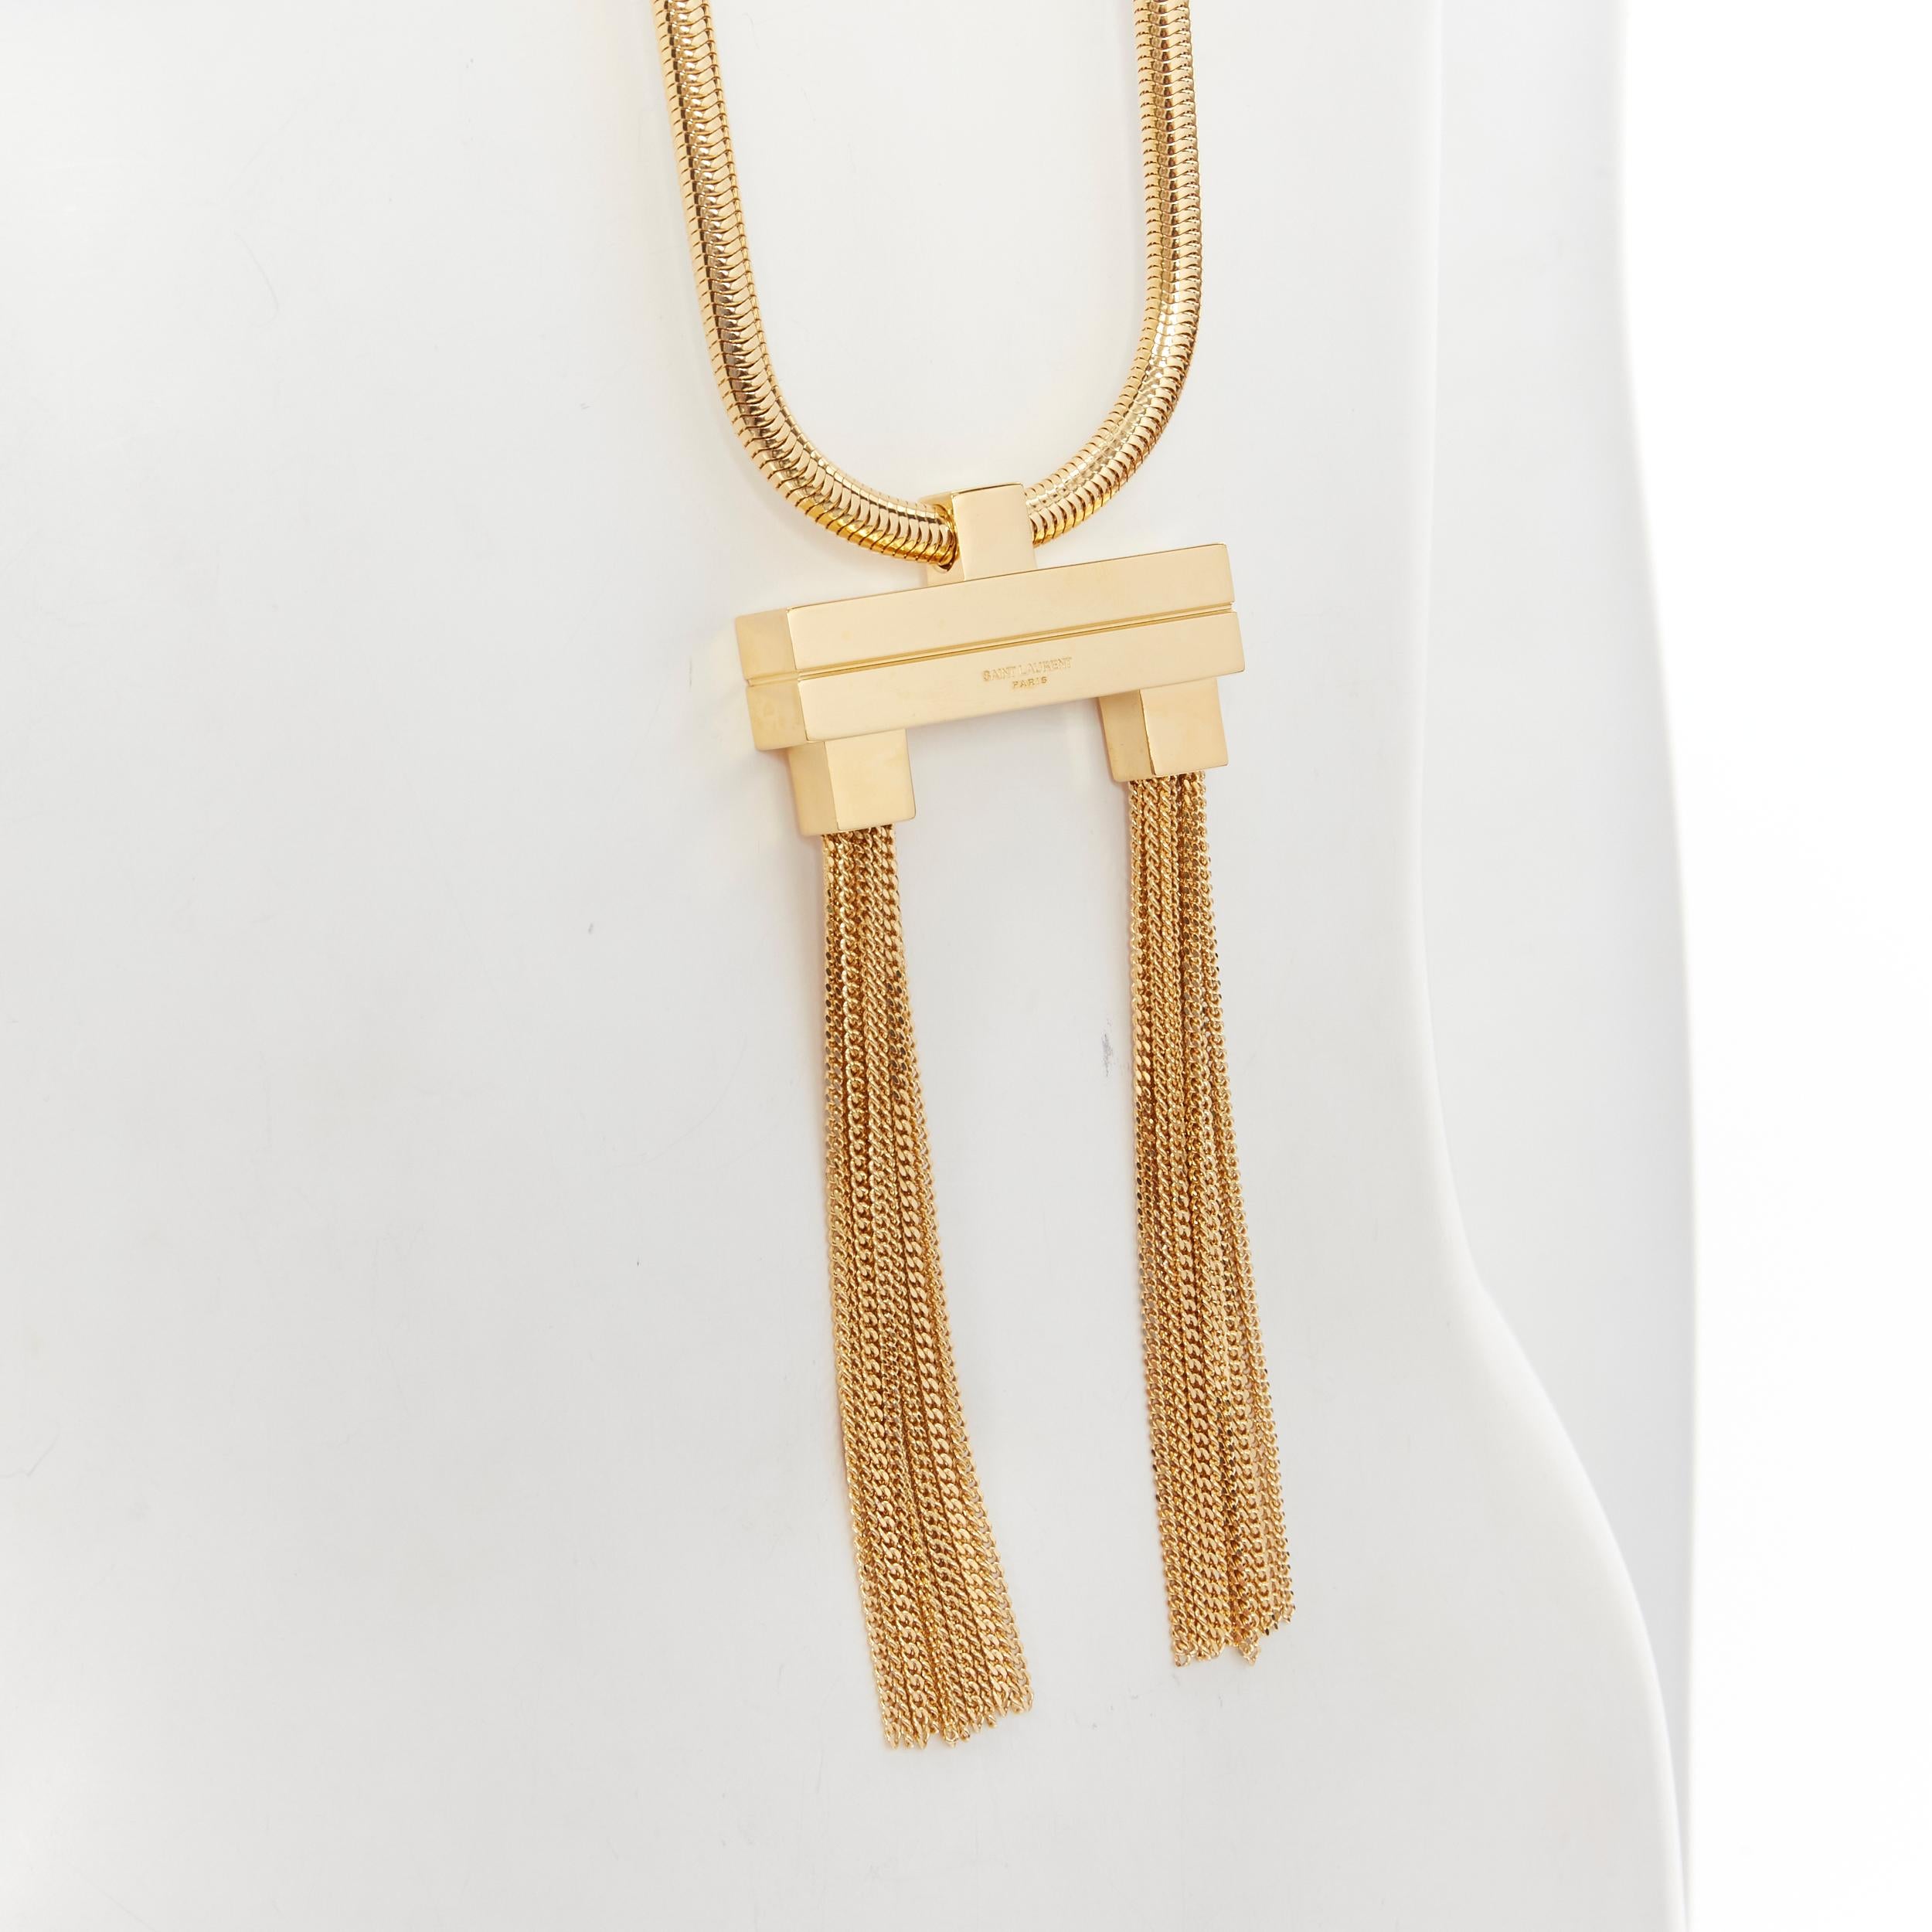 new SAINT LAURENT Hedi Slimane 2013 Runway Opium gold double tassel necklace 
Reference: TGAS/B01728 
Brand: Saint Laurent 
Designer: Hedi Slimane 
Collection: 2013 Runway 
Material: Metal 
Color: Gold 
Pattern: Solid 
Closure: Clasp
Extra Detail: